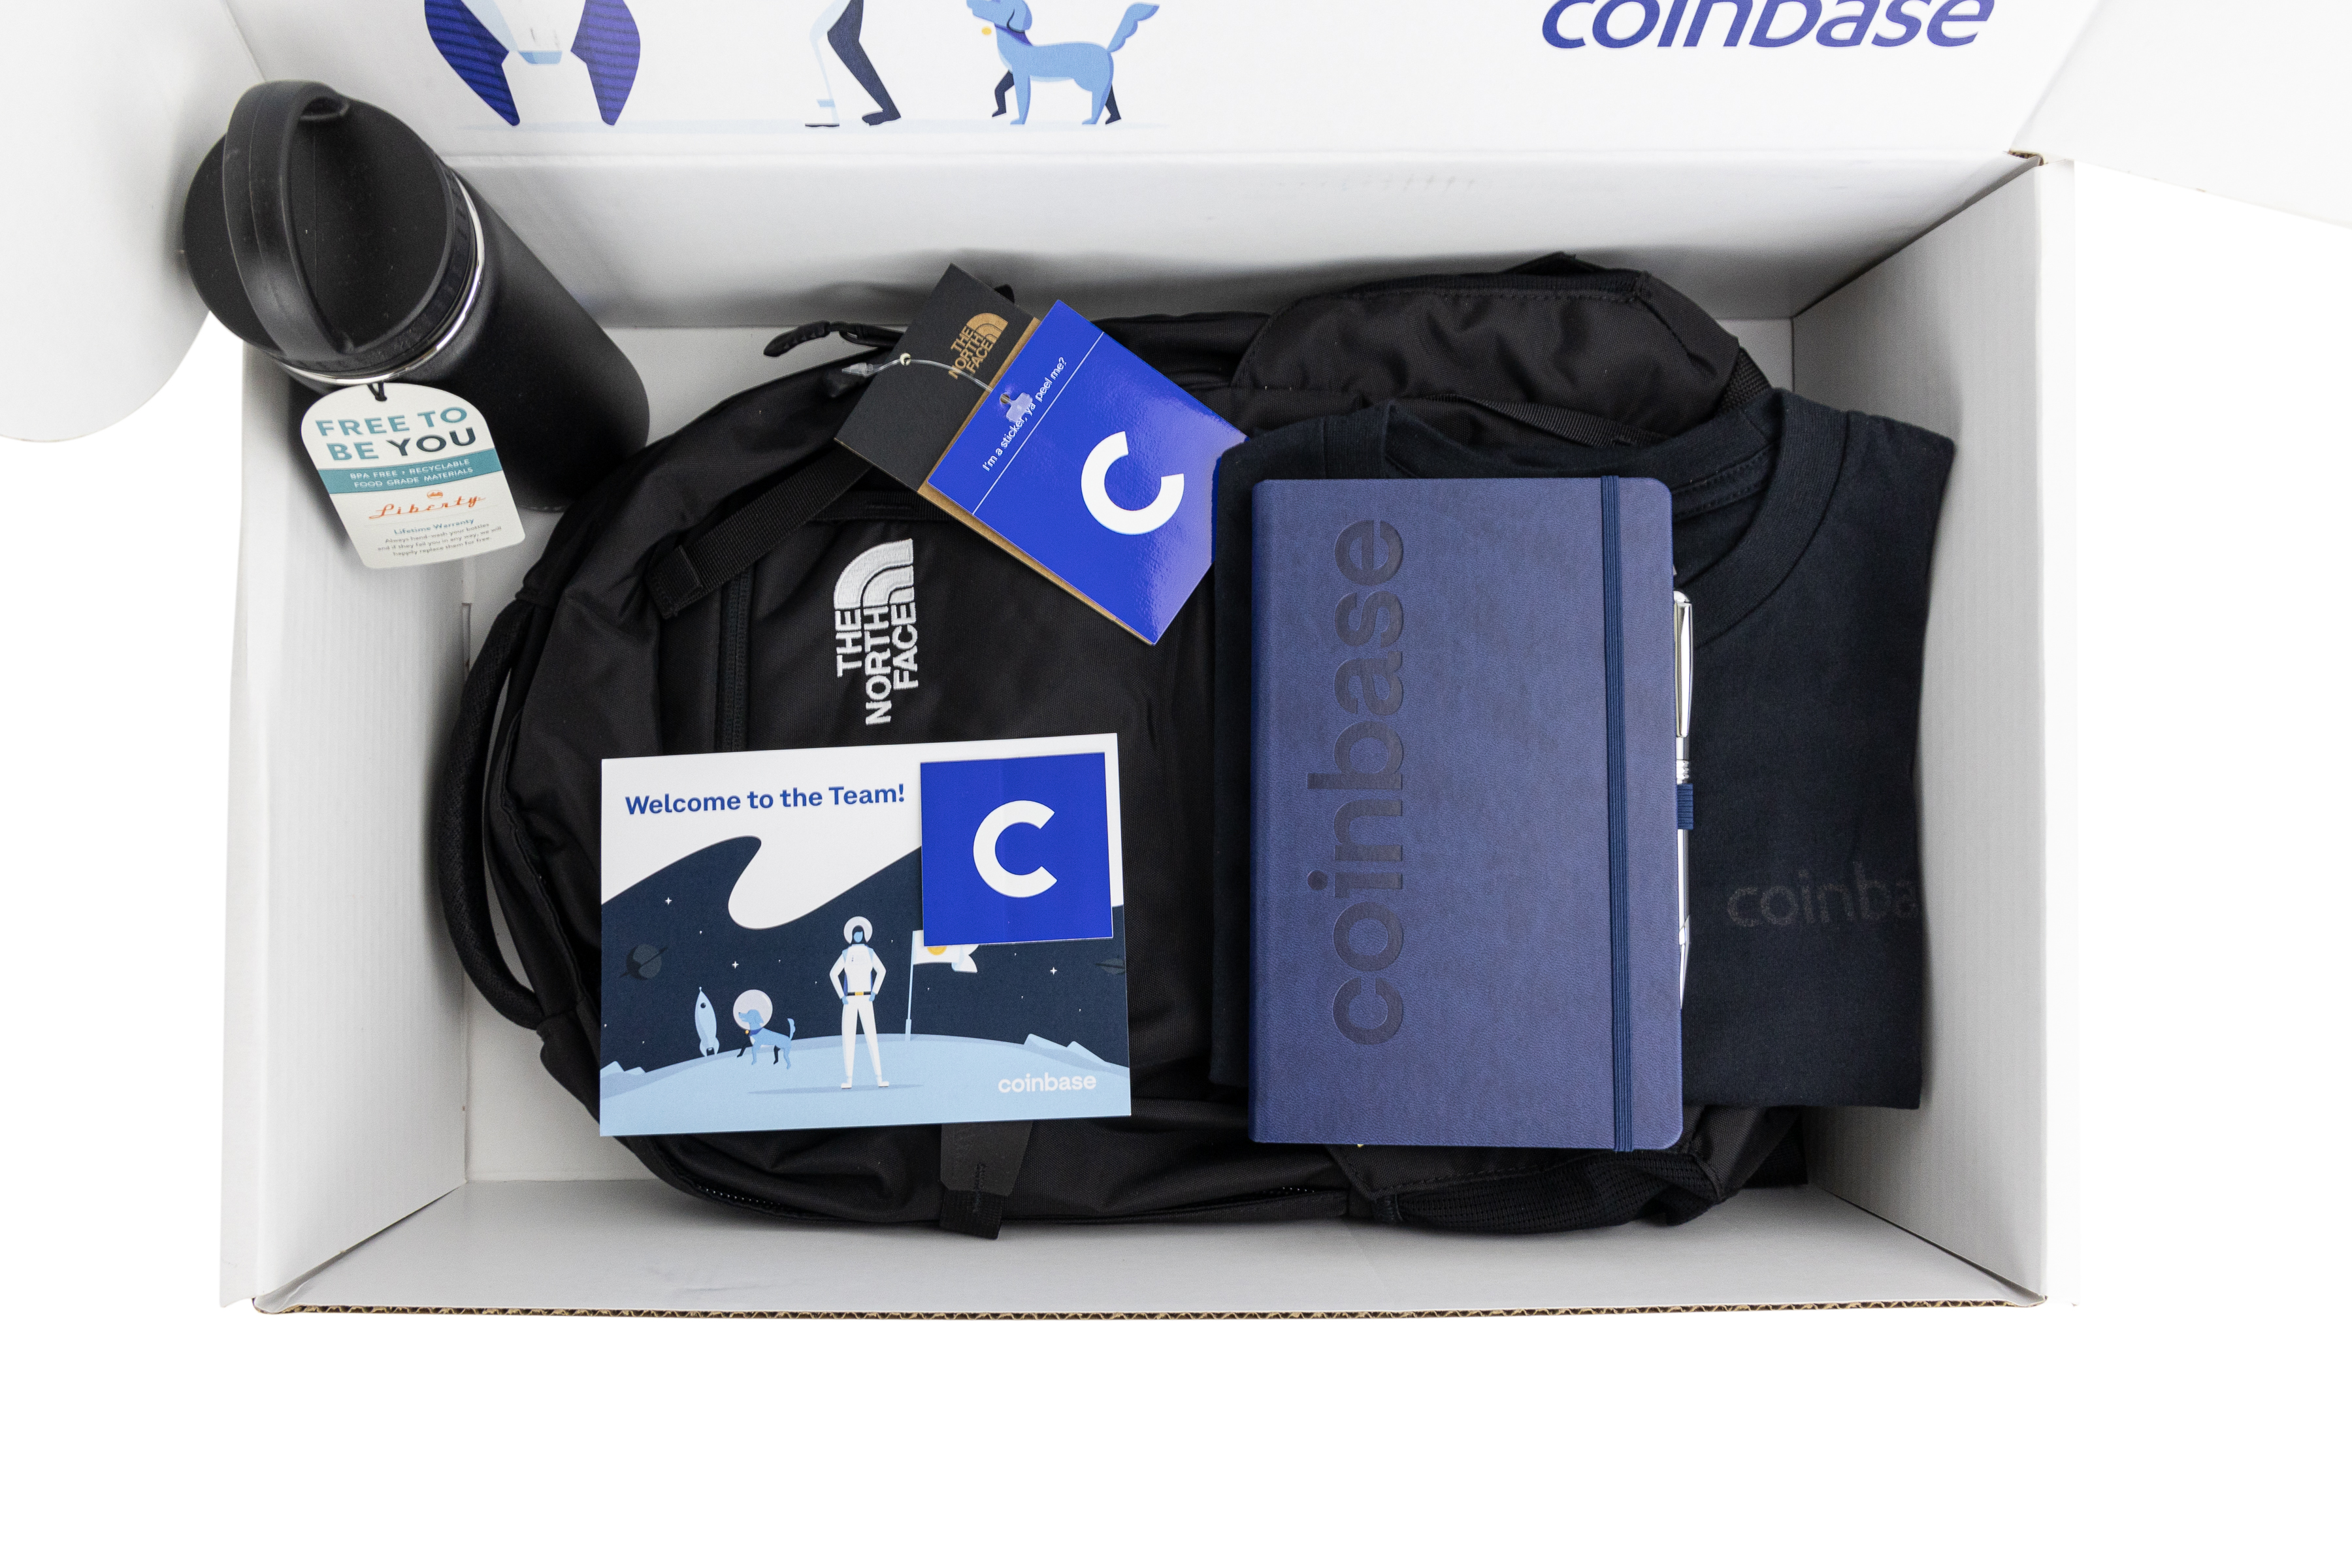 Coinbase welcome employee new hire box